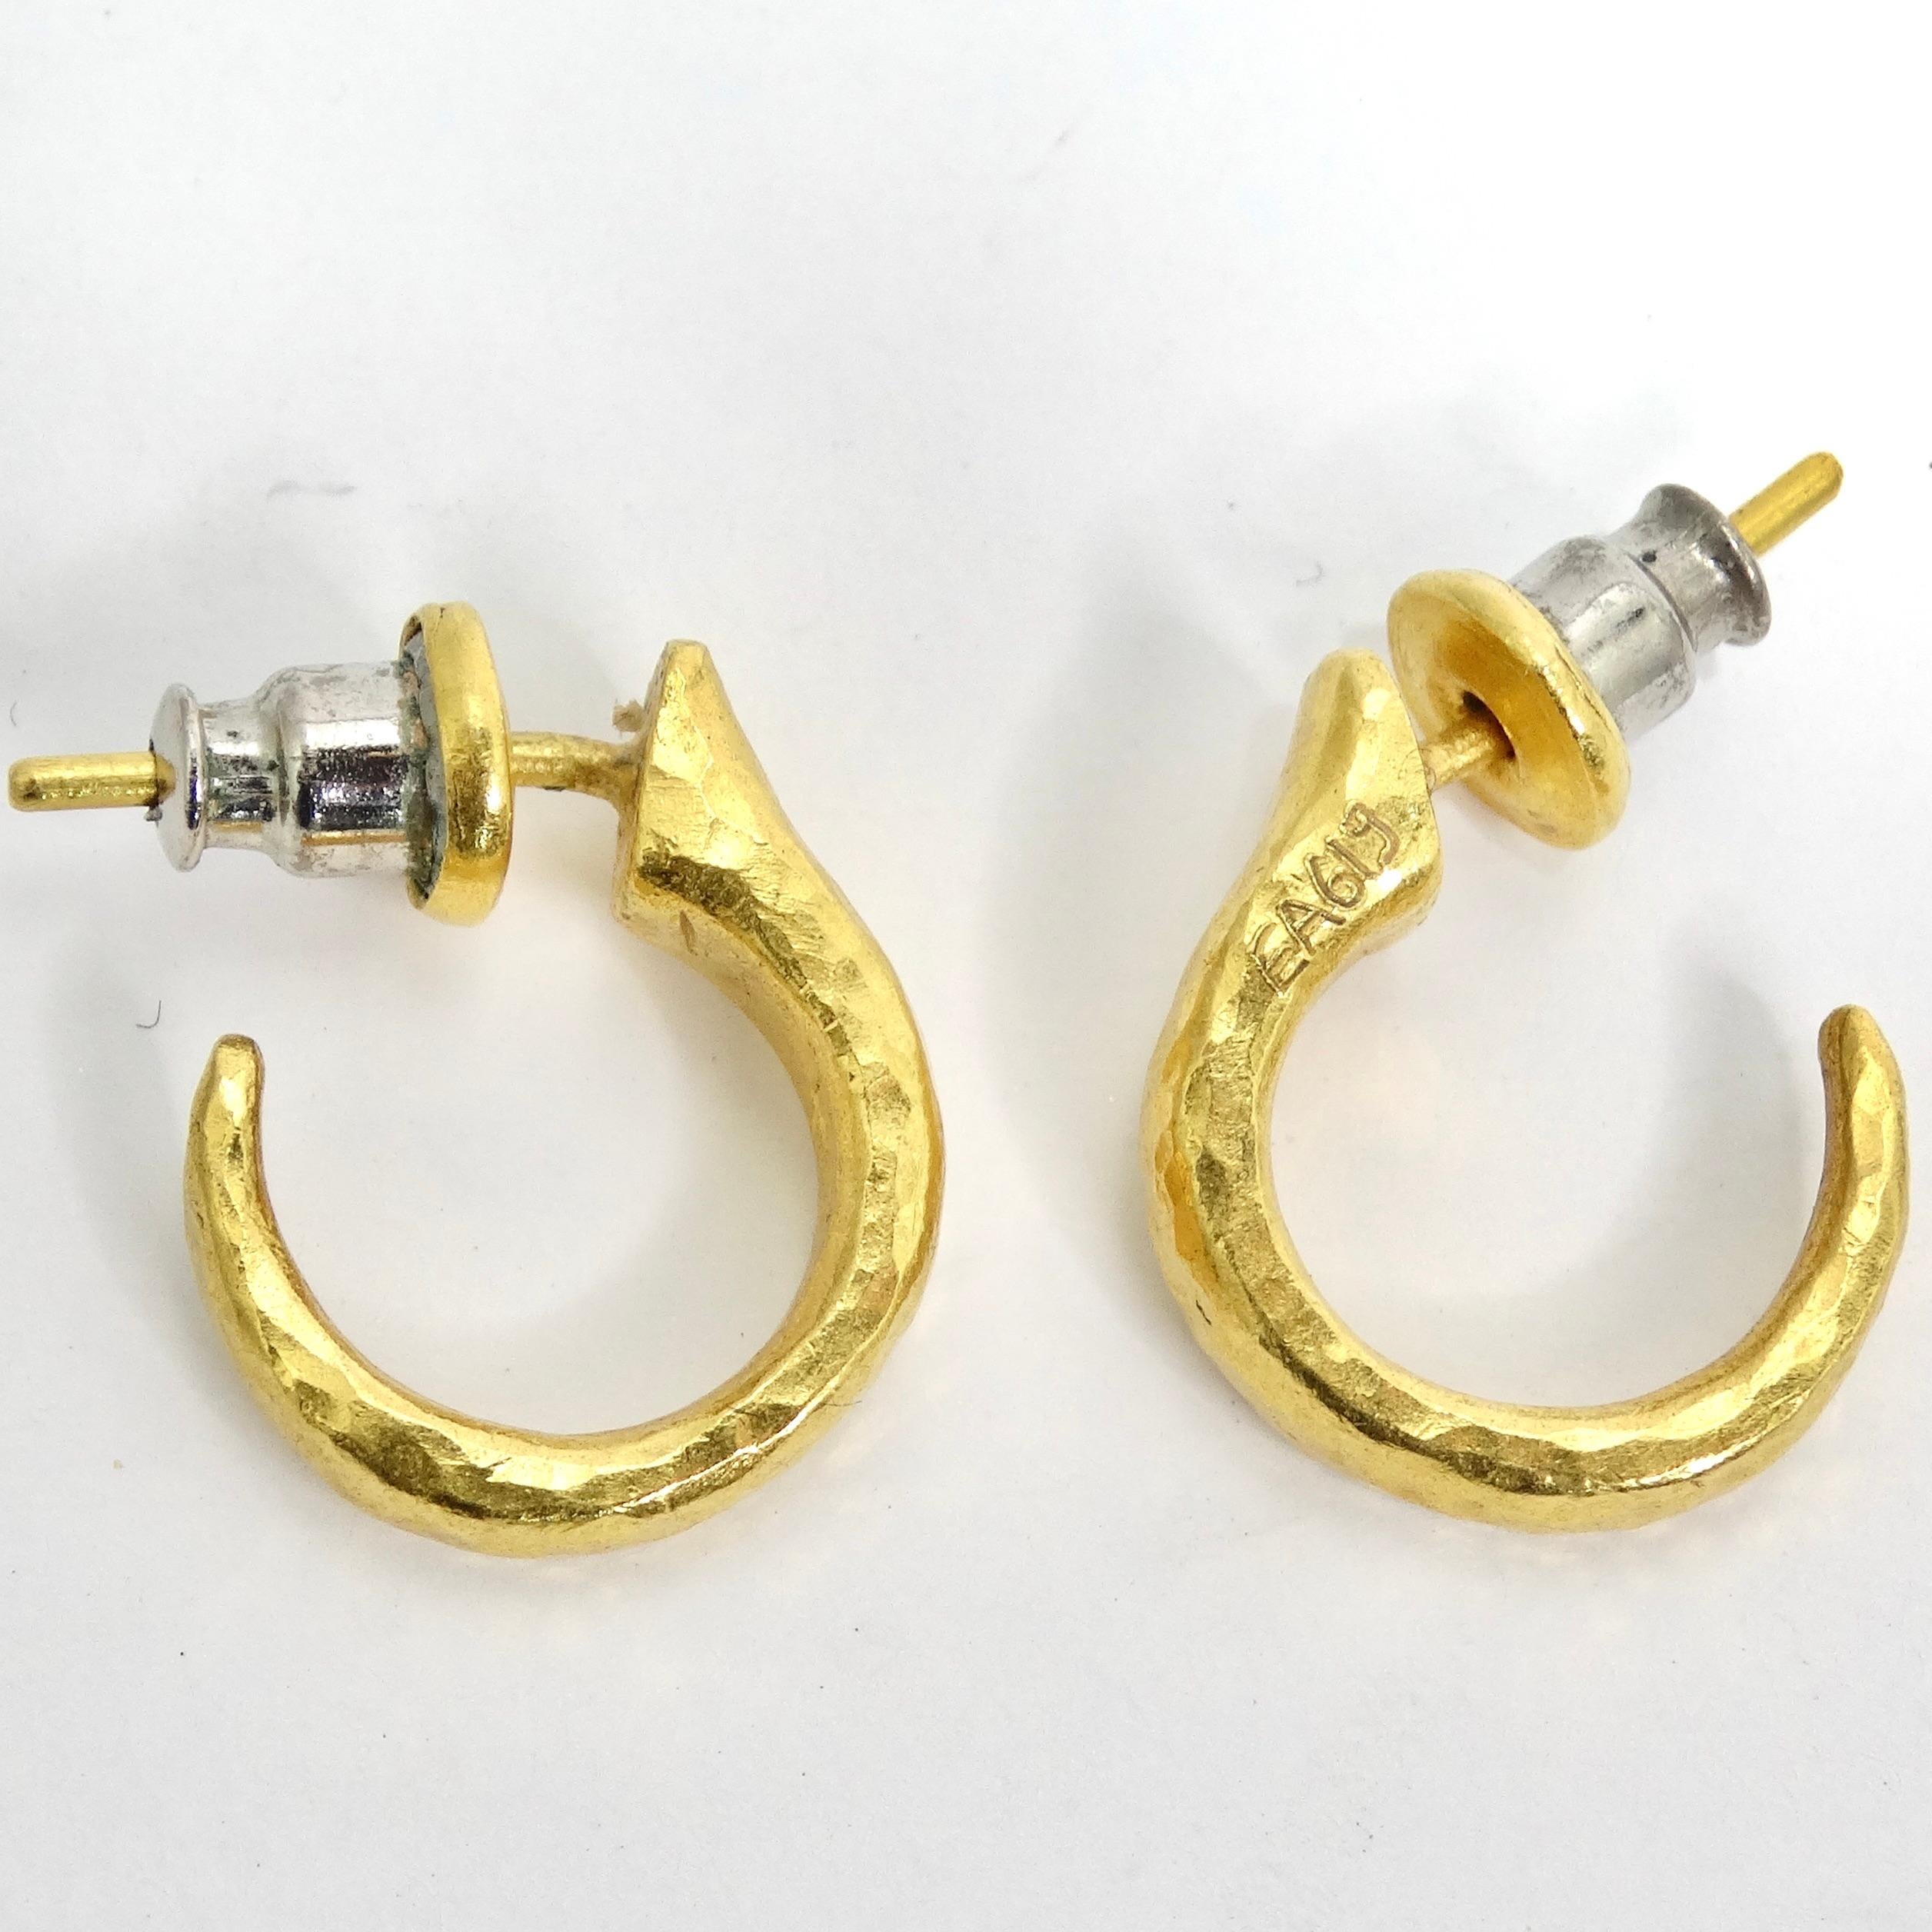 Introducing the Gurhan 24k Gold Thor Hoop Earrings—a classic and timeless pair that effortlessly combines elegance with simplicity. These mini hoop earrings are meticulously crafted, featuring Sterling Silver plated with 24k Gold Vermeil, while the